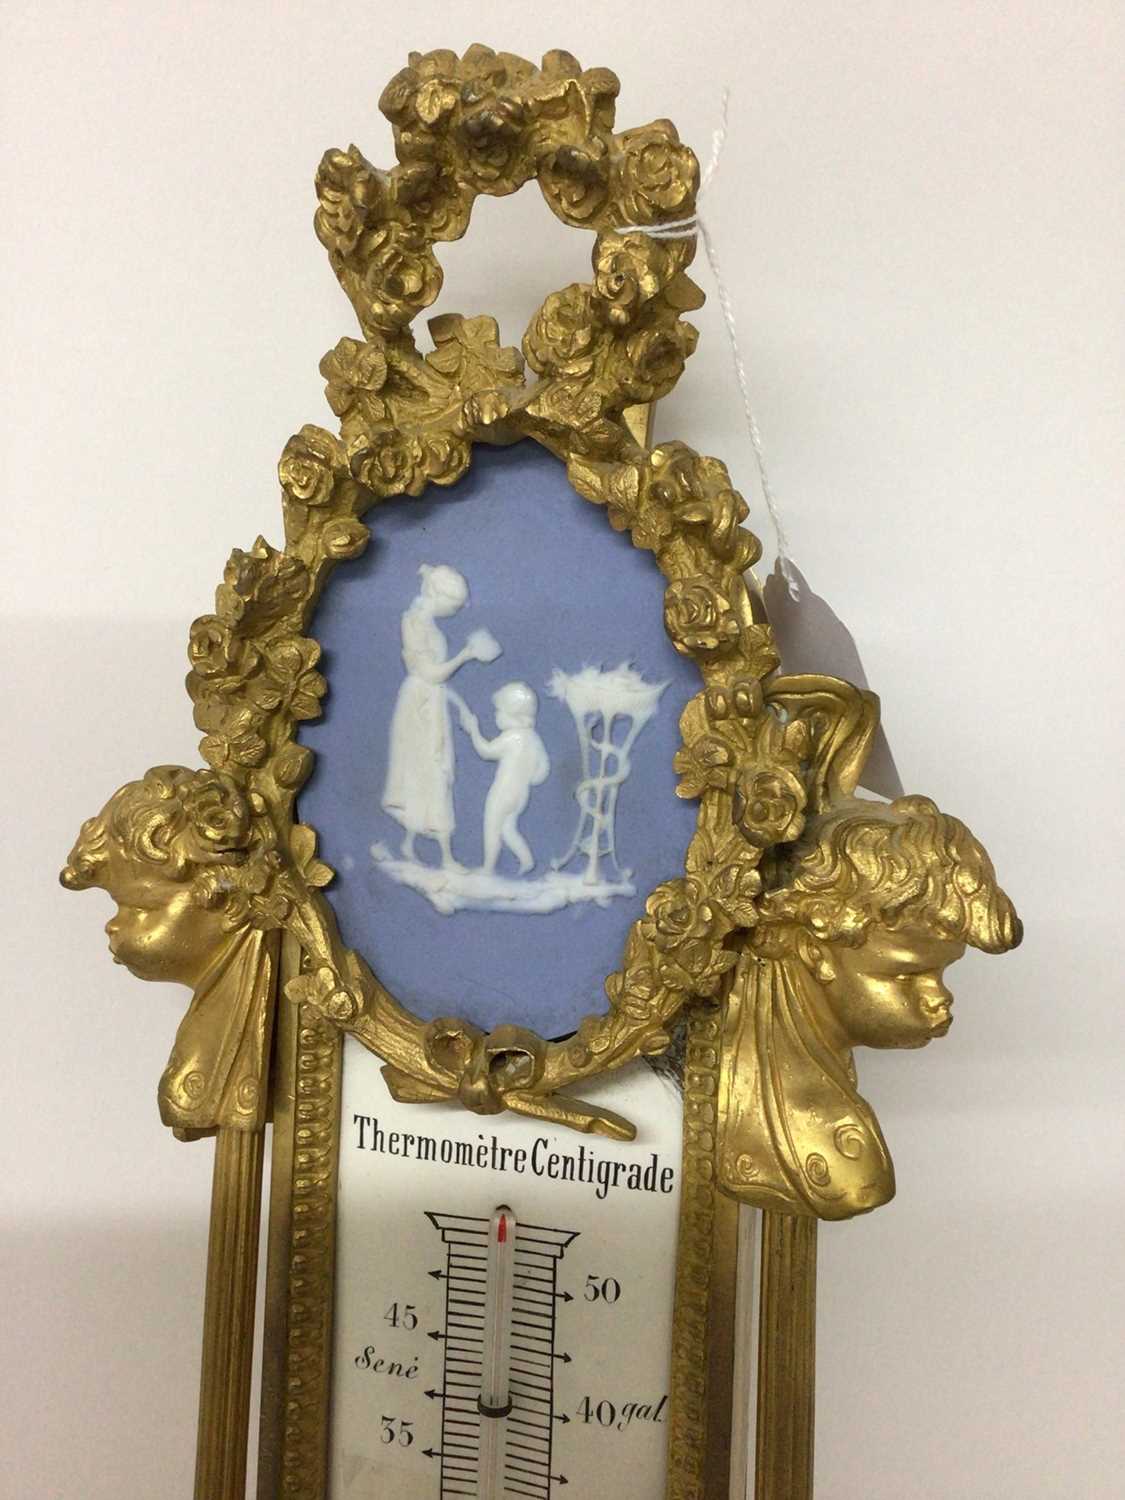 Ornate 19th century French ormolu and porcelain mounted barometer, later painted dial, signed Thierr - Image 4 of 8